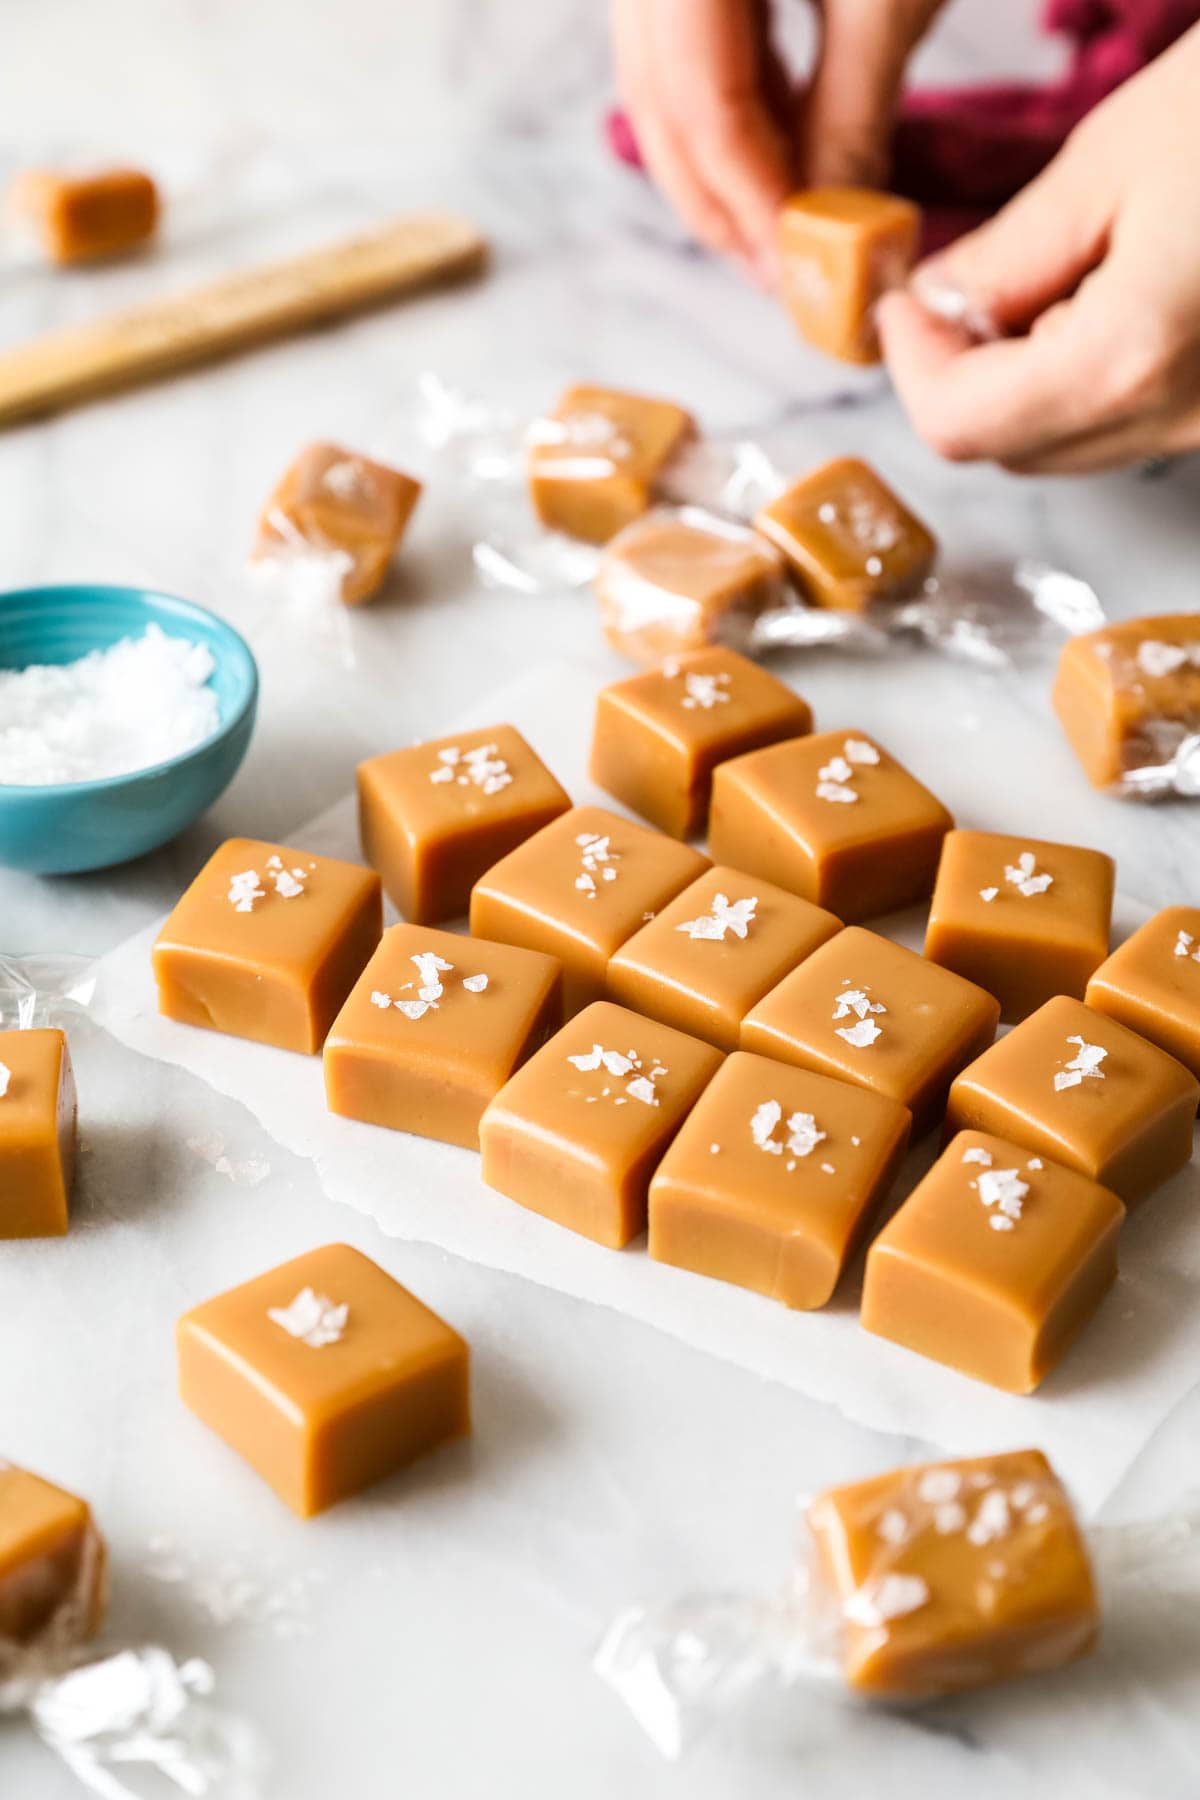 Square-cut caramels being wrapped in cellophane.